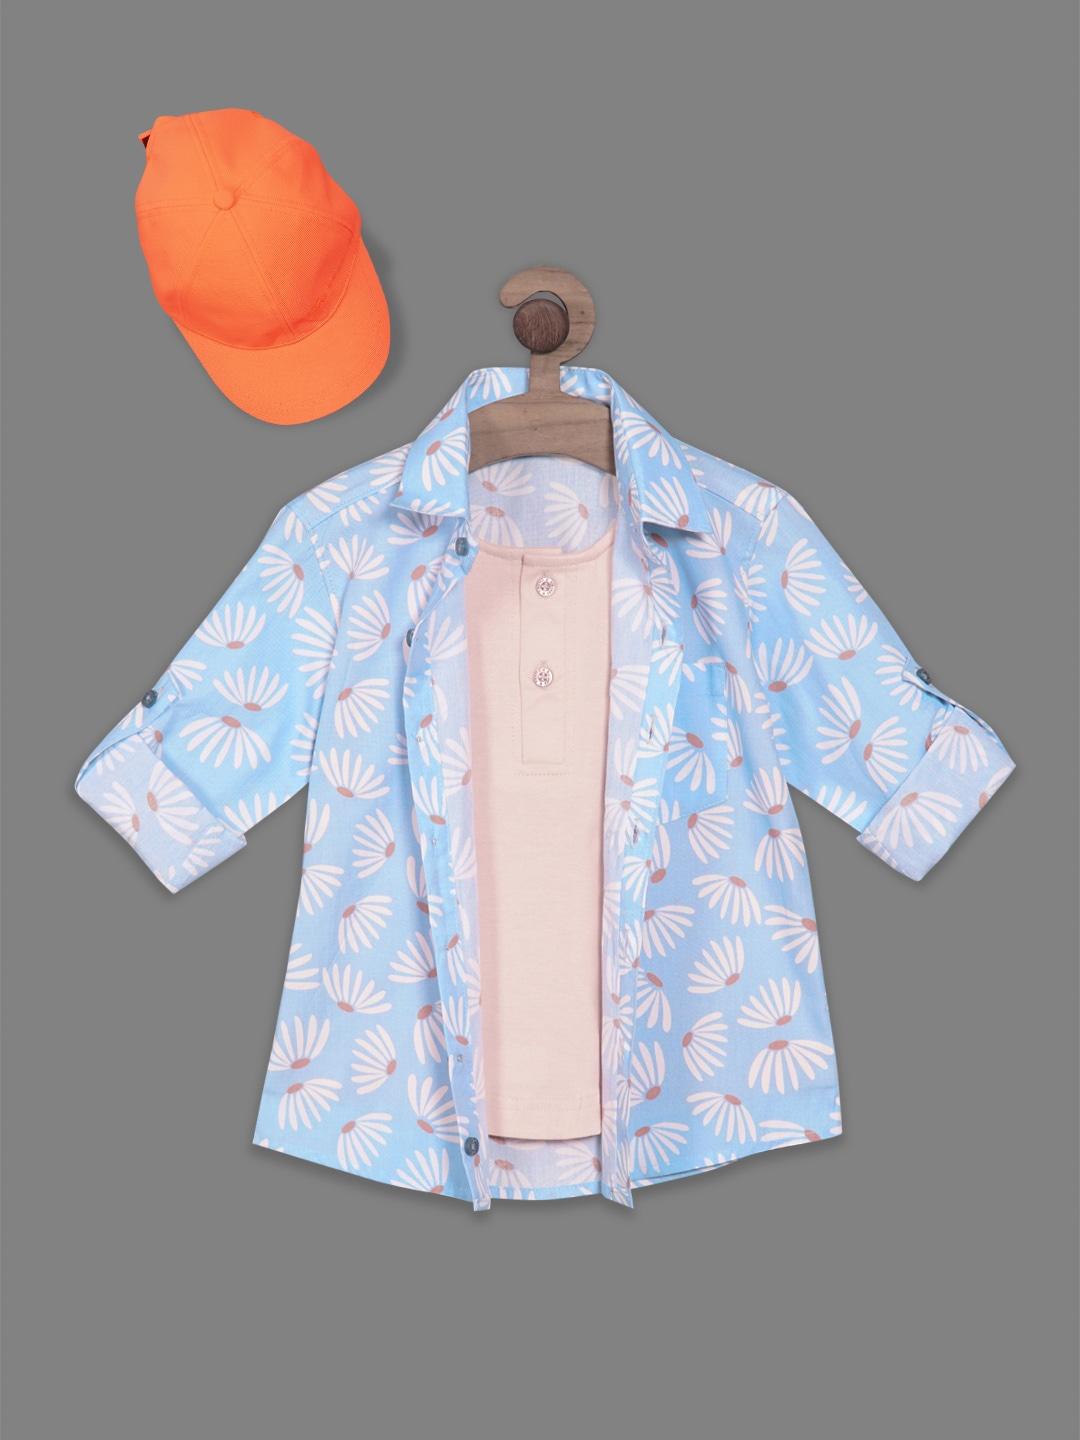 rikidoos boys floral printed casual cotton shirt with attached t-shirt & cap